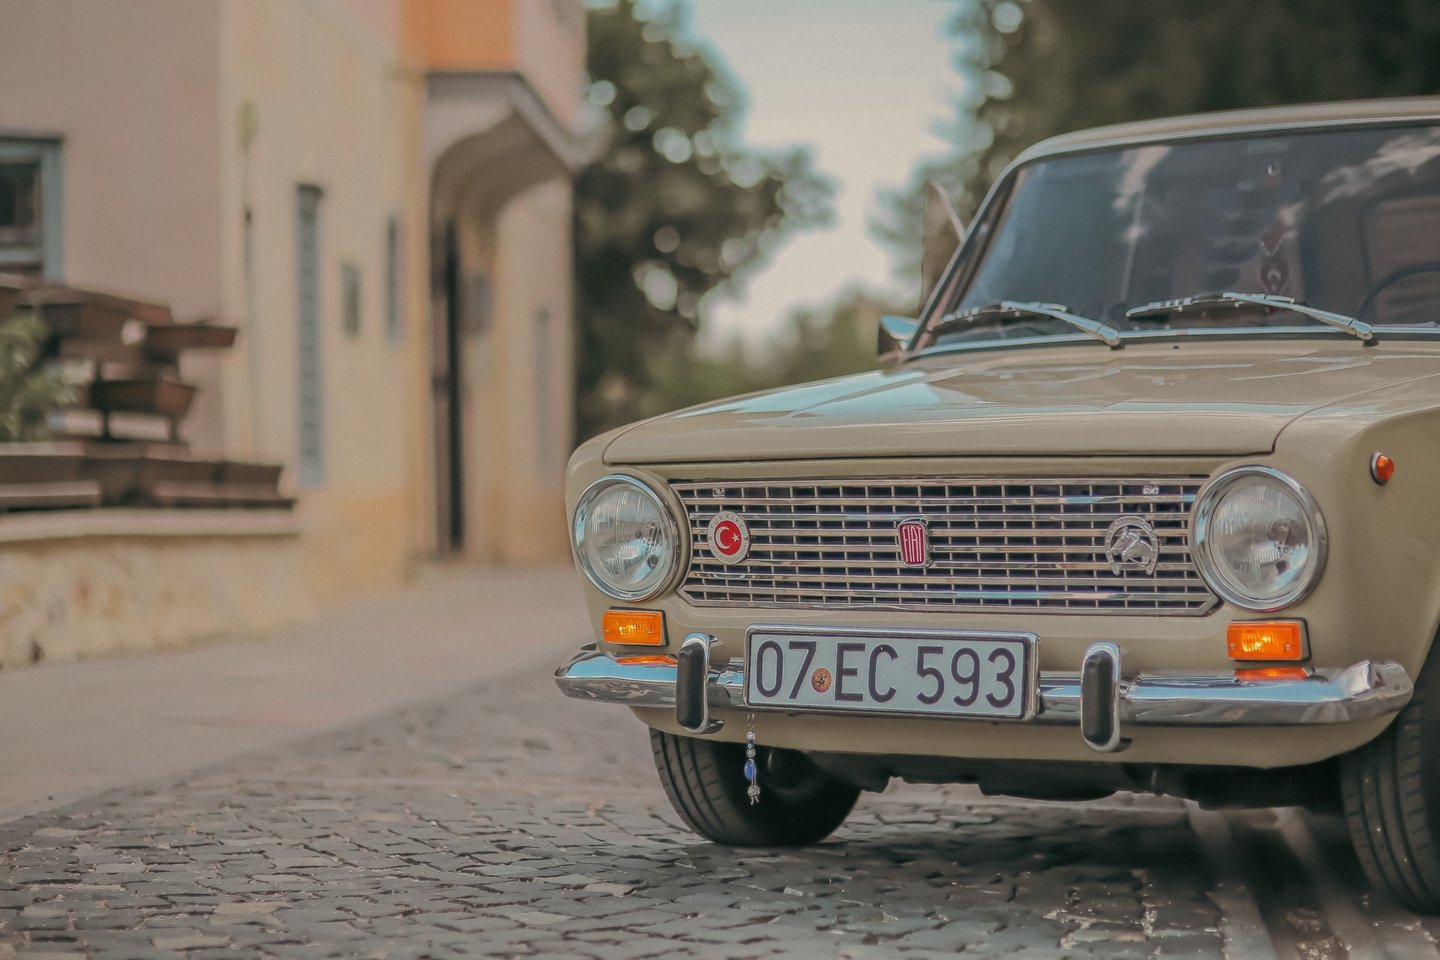 Man restores Turkish Fiat 124 in father's memory with Italian